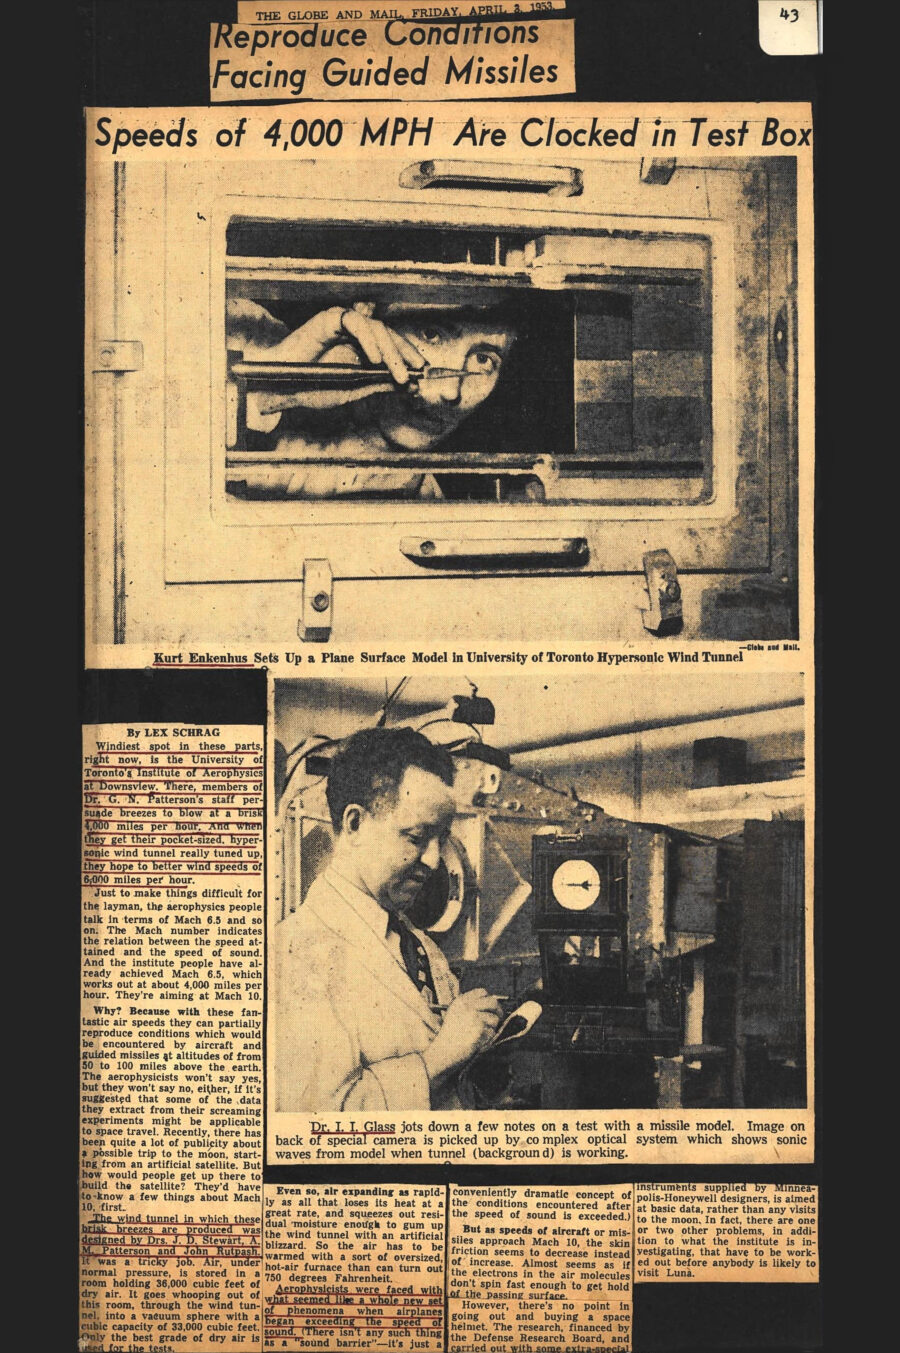 Newspaper clipping from The Globe and Mail, April 3, 1953
Headline: Reproduce Conditions Facing Guided Missiles: Speeds of 4,000 MPH Are Clocked in Test Box
Byline: Lex Schrag
Photo 1: Behind the window of a wind tunnel, a man inside adjusts a plane model.
Caption: Kurt Enkenhus Sets Up a Plane Surface Model in University of Toronto Hypersonic Wind Tunnel
Photo 2: Dr. Glass, wearing a lab coat, takes notes as he stands before lab equipment, an image of a missile model visible on a display.
Caption: Dr. I.I. Glass jots down a few notes on a test with a missile model. Image on back of special camera is picked up by complex optical system which shows sonic waves from model when tunnel (background) is working.
Windiest spot in these parts, right now, is the University of Toronto’s Institute of Aerophysics at Downsview. There, members of Dr. G.N. Patterson’s staff persuade breezes to blow at a brisk 4,000 miles per hour. And when they get their pocket-sized, hypersonic wind tunnel really tuned up, they hope to better wind speeds of 6,000 miles per hour.
Just to make things difficult for the layman, the aerophysics people talk in terms of Mach 6.5 and so on. The Mach number indicates the relation between the speed attained and the speed of sound. And the institute people have already achieved Mach 6.5, which works out at about 4,000 miles per hour. They’re aiming at Mach 10. Why? Because with these fantastic air speeds they can partially reproduce conditions which would be encountered by aircraft and guided missiles at altitudes of from 50 to 100 miles above the earth. The aerophysicists won’t say yes, but they won’t say no, either, if it’s suggested some of the data they extract from their screaming experiments might be applicable to space travel. Recently, there has been quite a lot of publicity about a possible trip to the moon, starting from an artificial satellite. But how would people get up there to build the satellite? They’d have to know a few things about Mach 10, first.
The wind tunnel in which these brisk breezes are produced was designed by Drs. J.D. Stewart, A.M. Patterson and John Ruptash. It was a tricky job. Air, under normal pressure, is stored in a room holding 36,000 cubic feet of dry air. It goes whooping out of this room, through the wind tunnel, into a vacuum sphere with a cubic capacity of 33,000 cubic feet. Only the best grade of dry air is used for the tests. Even so, air expanding as rapidly as all that loses its heat at a great rate, and squeezes out residual moisture enough to gum up the wind tunnel with an artificial blizzard. So the air has to be warmed with a sort of oversized, hot-air furnace that can turn out 750 degrees Fahrenheit.
Aerophysicists were faced with what seemed like a whole new set of phenomena when airplanes began exceeding the speed of sound. (There isn’t any such thing as a “sound barrier” – it’s just a conveniently dramatic concept of the conditions encountered after the speed of sound is exceeded.) But as speeds of aircraft or missiles approach Mach 10, the skin friction seems to decrease instead of increase. Almost as if the electrons in the air molecules don’t spin fast enough to get hold of the passing surface. However, there’s no point in going out and buying a space helmet. The research, financed by the Defense Research Board, and carried out with some extra-special instruments supplied by Minneapolis-Honeywell designers, is aimed at basic data, rather than any visits to the moon. In fact, there are one or two other problems, in addition to what the institute is investigating, that have to be worked out before anybody is likely to visit Luna.